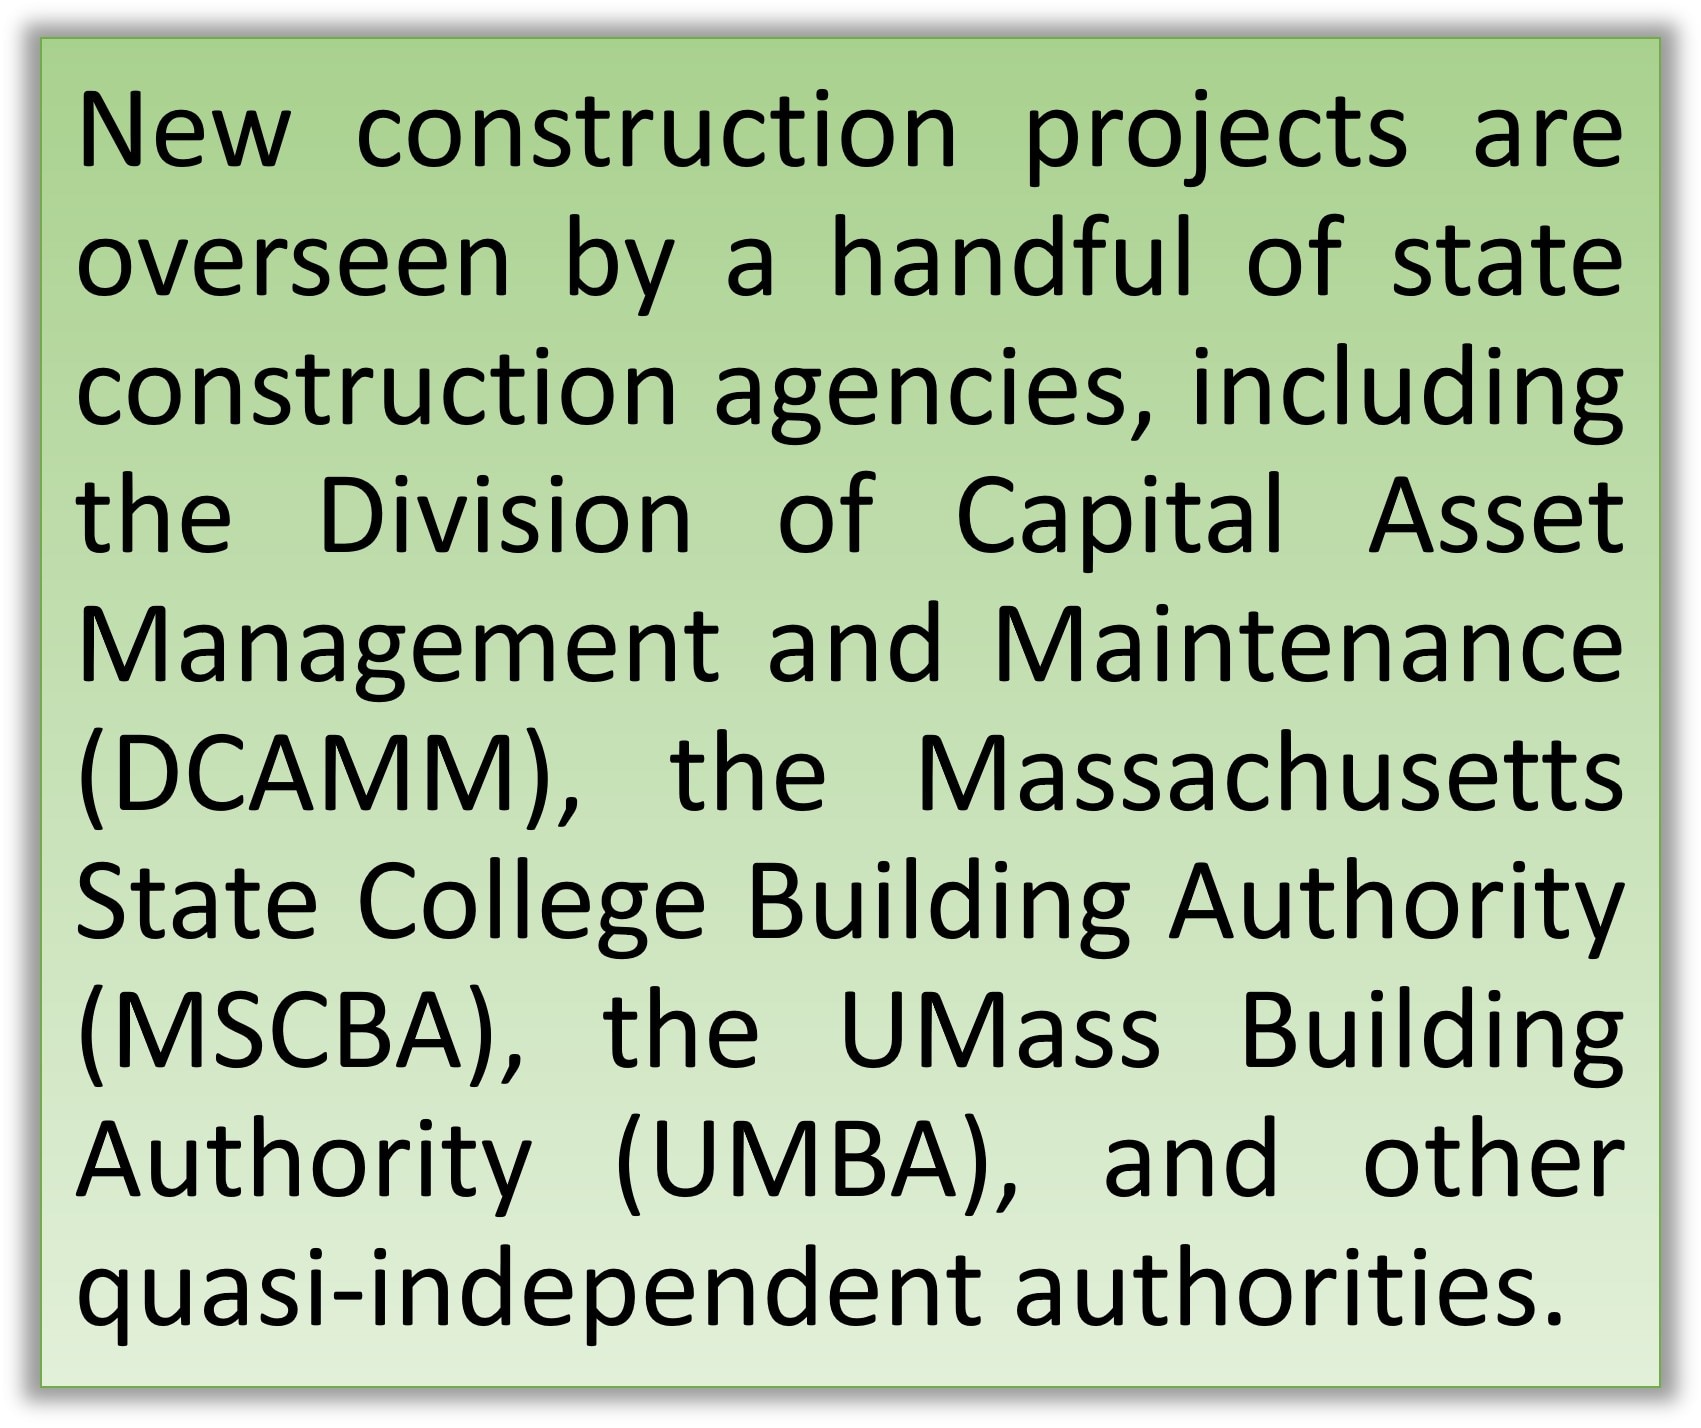 New construction projects are overseen by a handful of state construction agencies, including the Division of Capital Asset Management and Maintenance (DCAMM), the Massachusetts State College Building Authority (MSCBA), the UMass Building Authority (UMBA), and other quasi-independent authorities. 